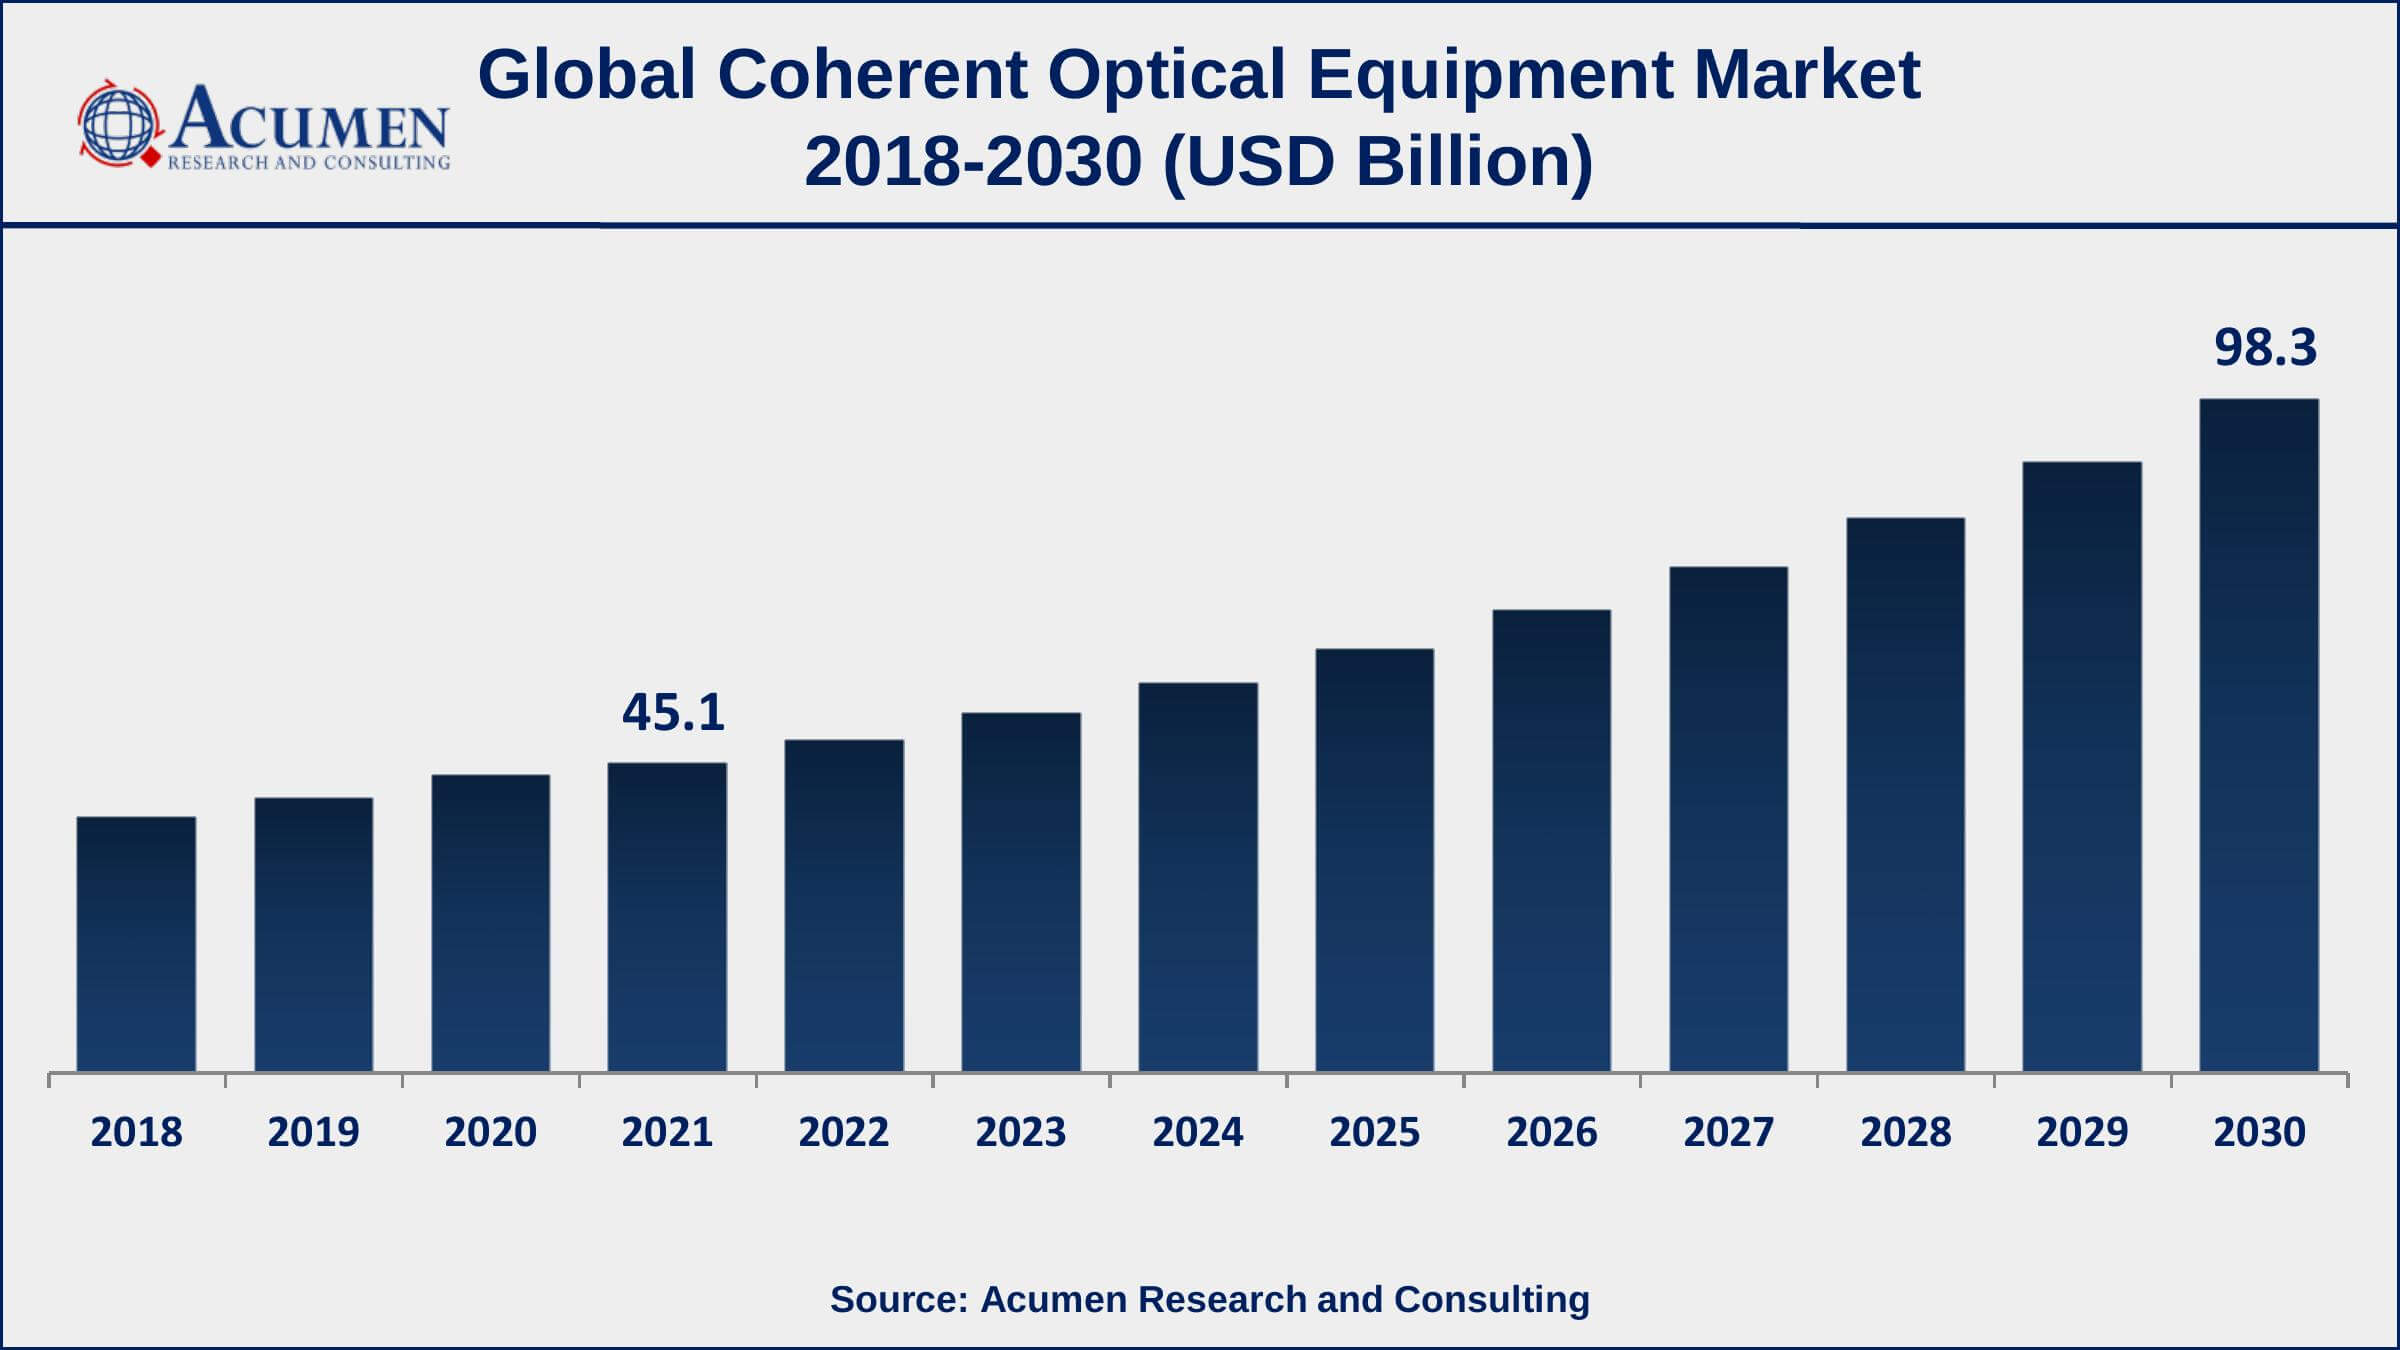 Asia-Pacific coherent optical equipment market growth will observe strongest CAGR from 2022 to 2030